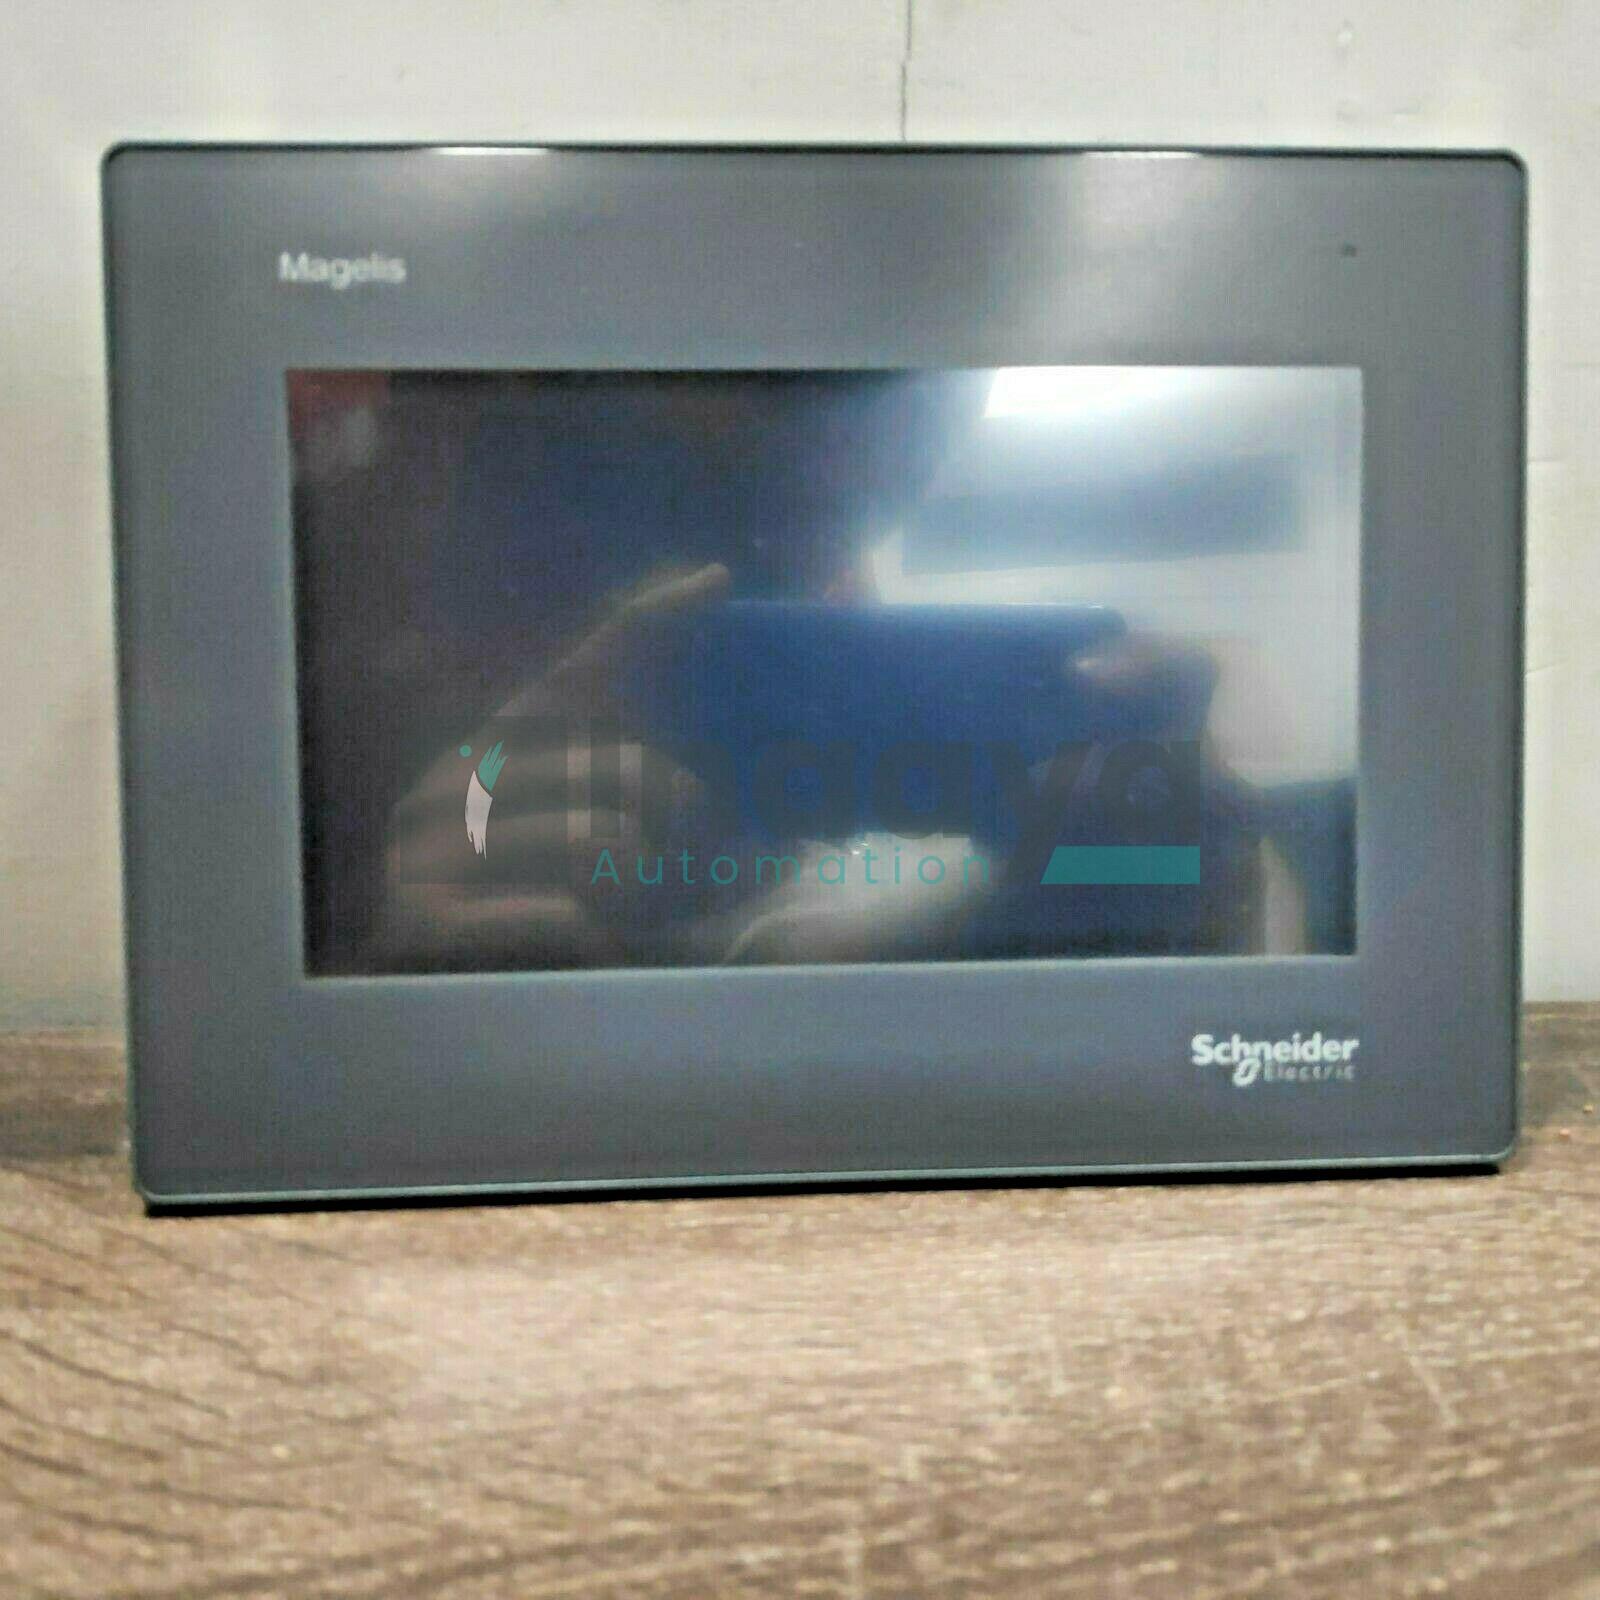 SCHNEIDER HMIGXU3500 MAGELIS OPERATOR INTERFACE TOUCH PANEL SCREEN 7IN COLOR 24VDC 5.4W MAGELIS EASY GXU INTERFACE